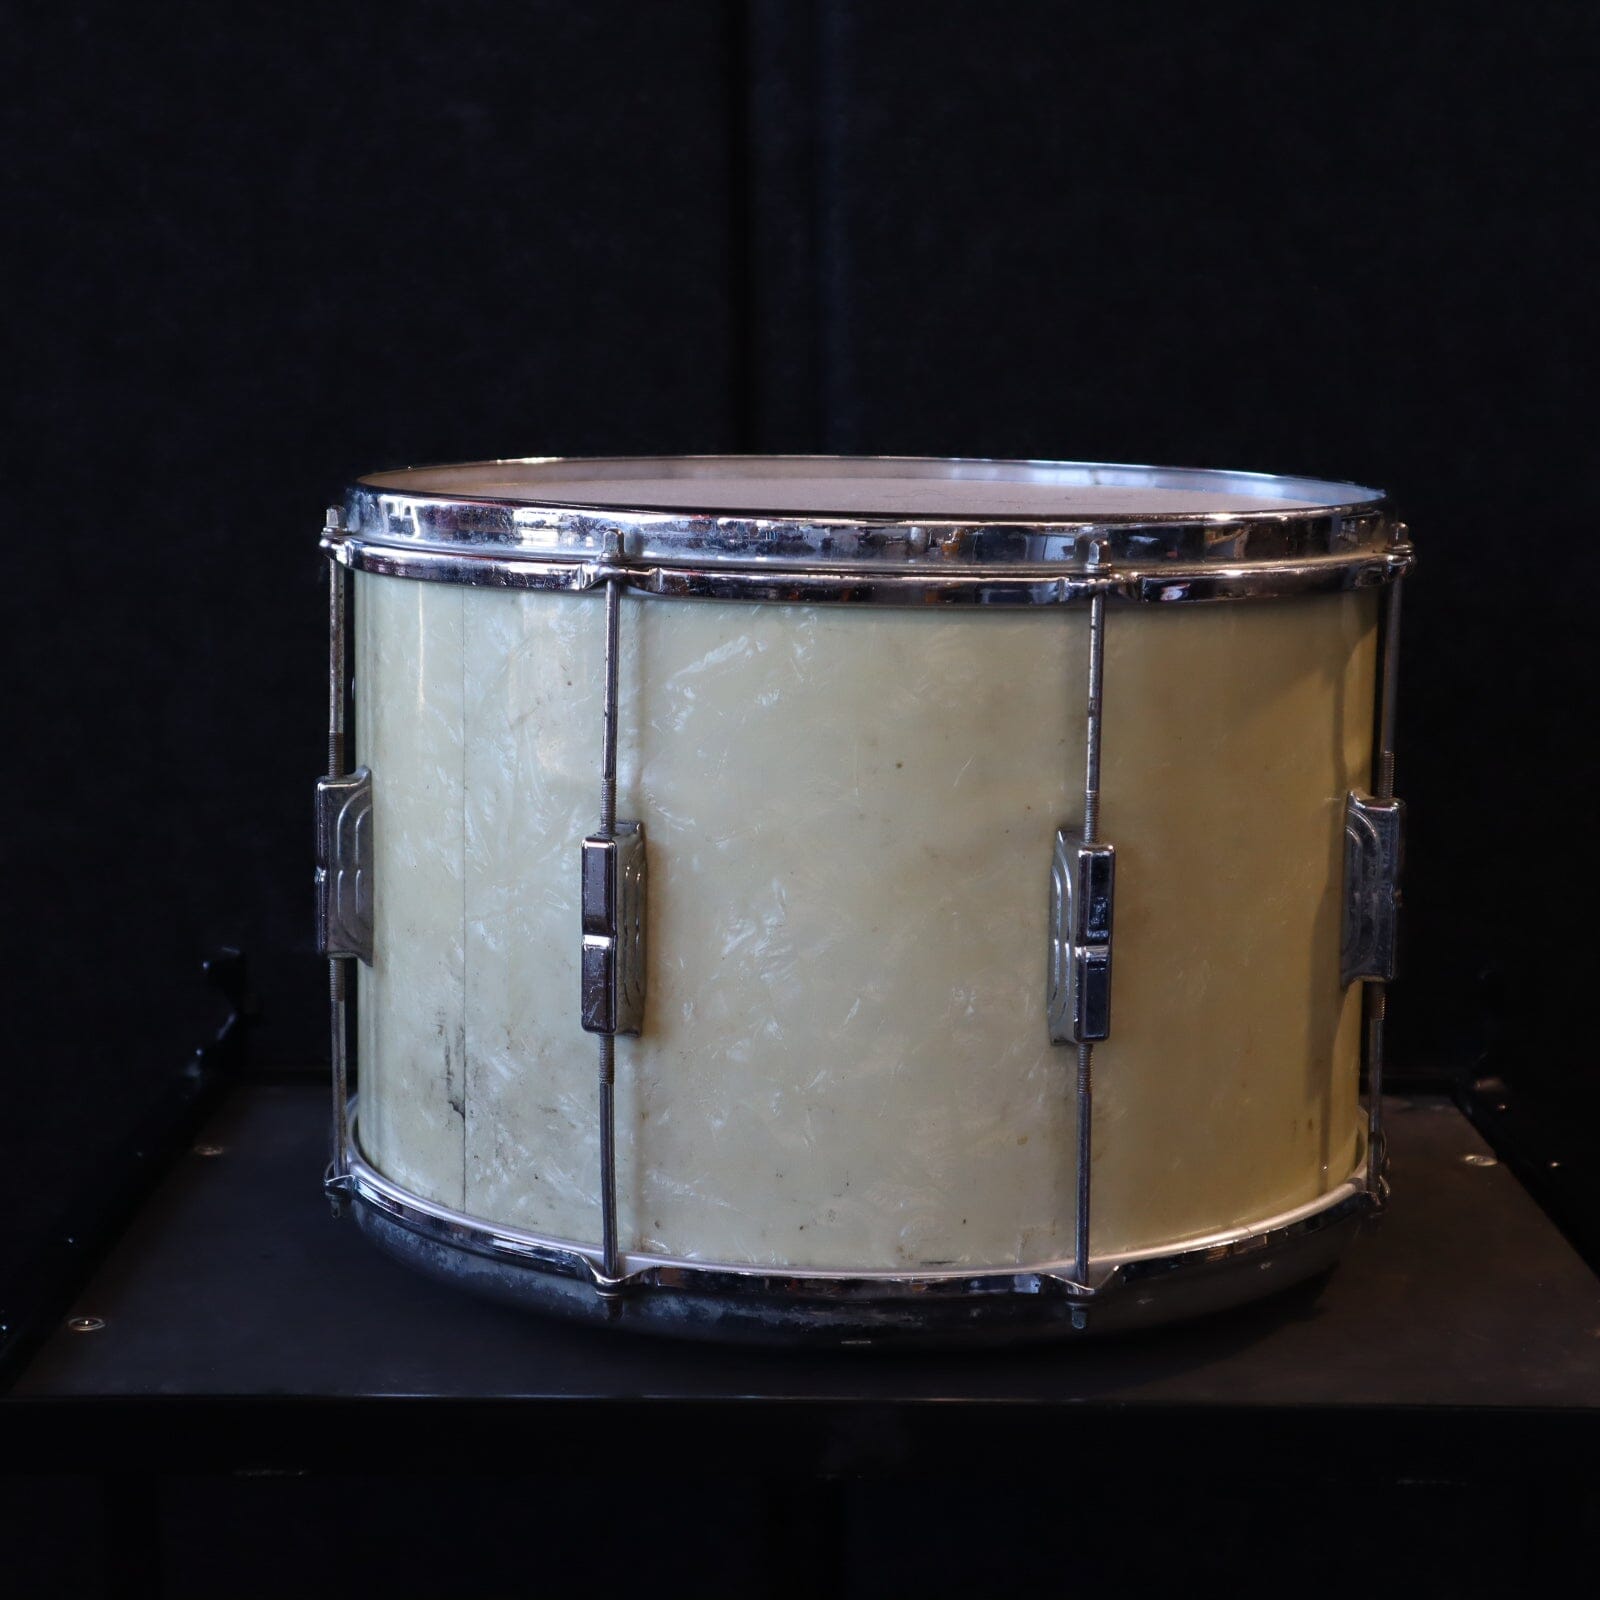 LEEDY SNARE DRUM 15" x 10" WMP CONSIGNMENT OTHER Leedy 